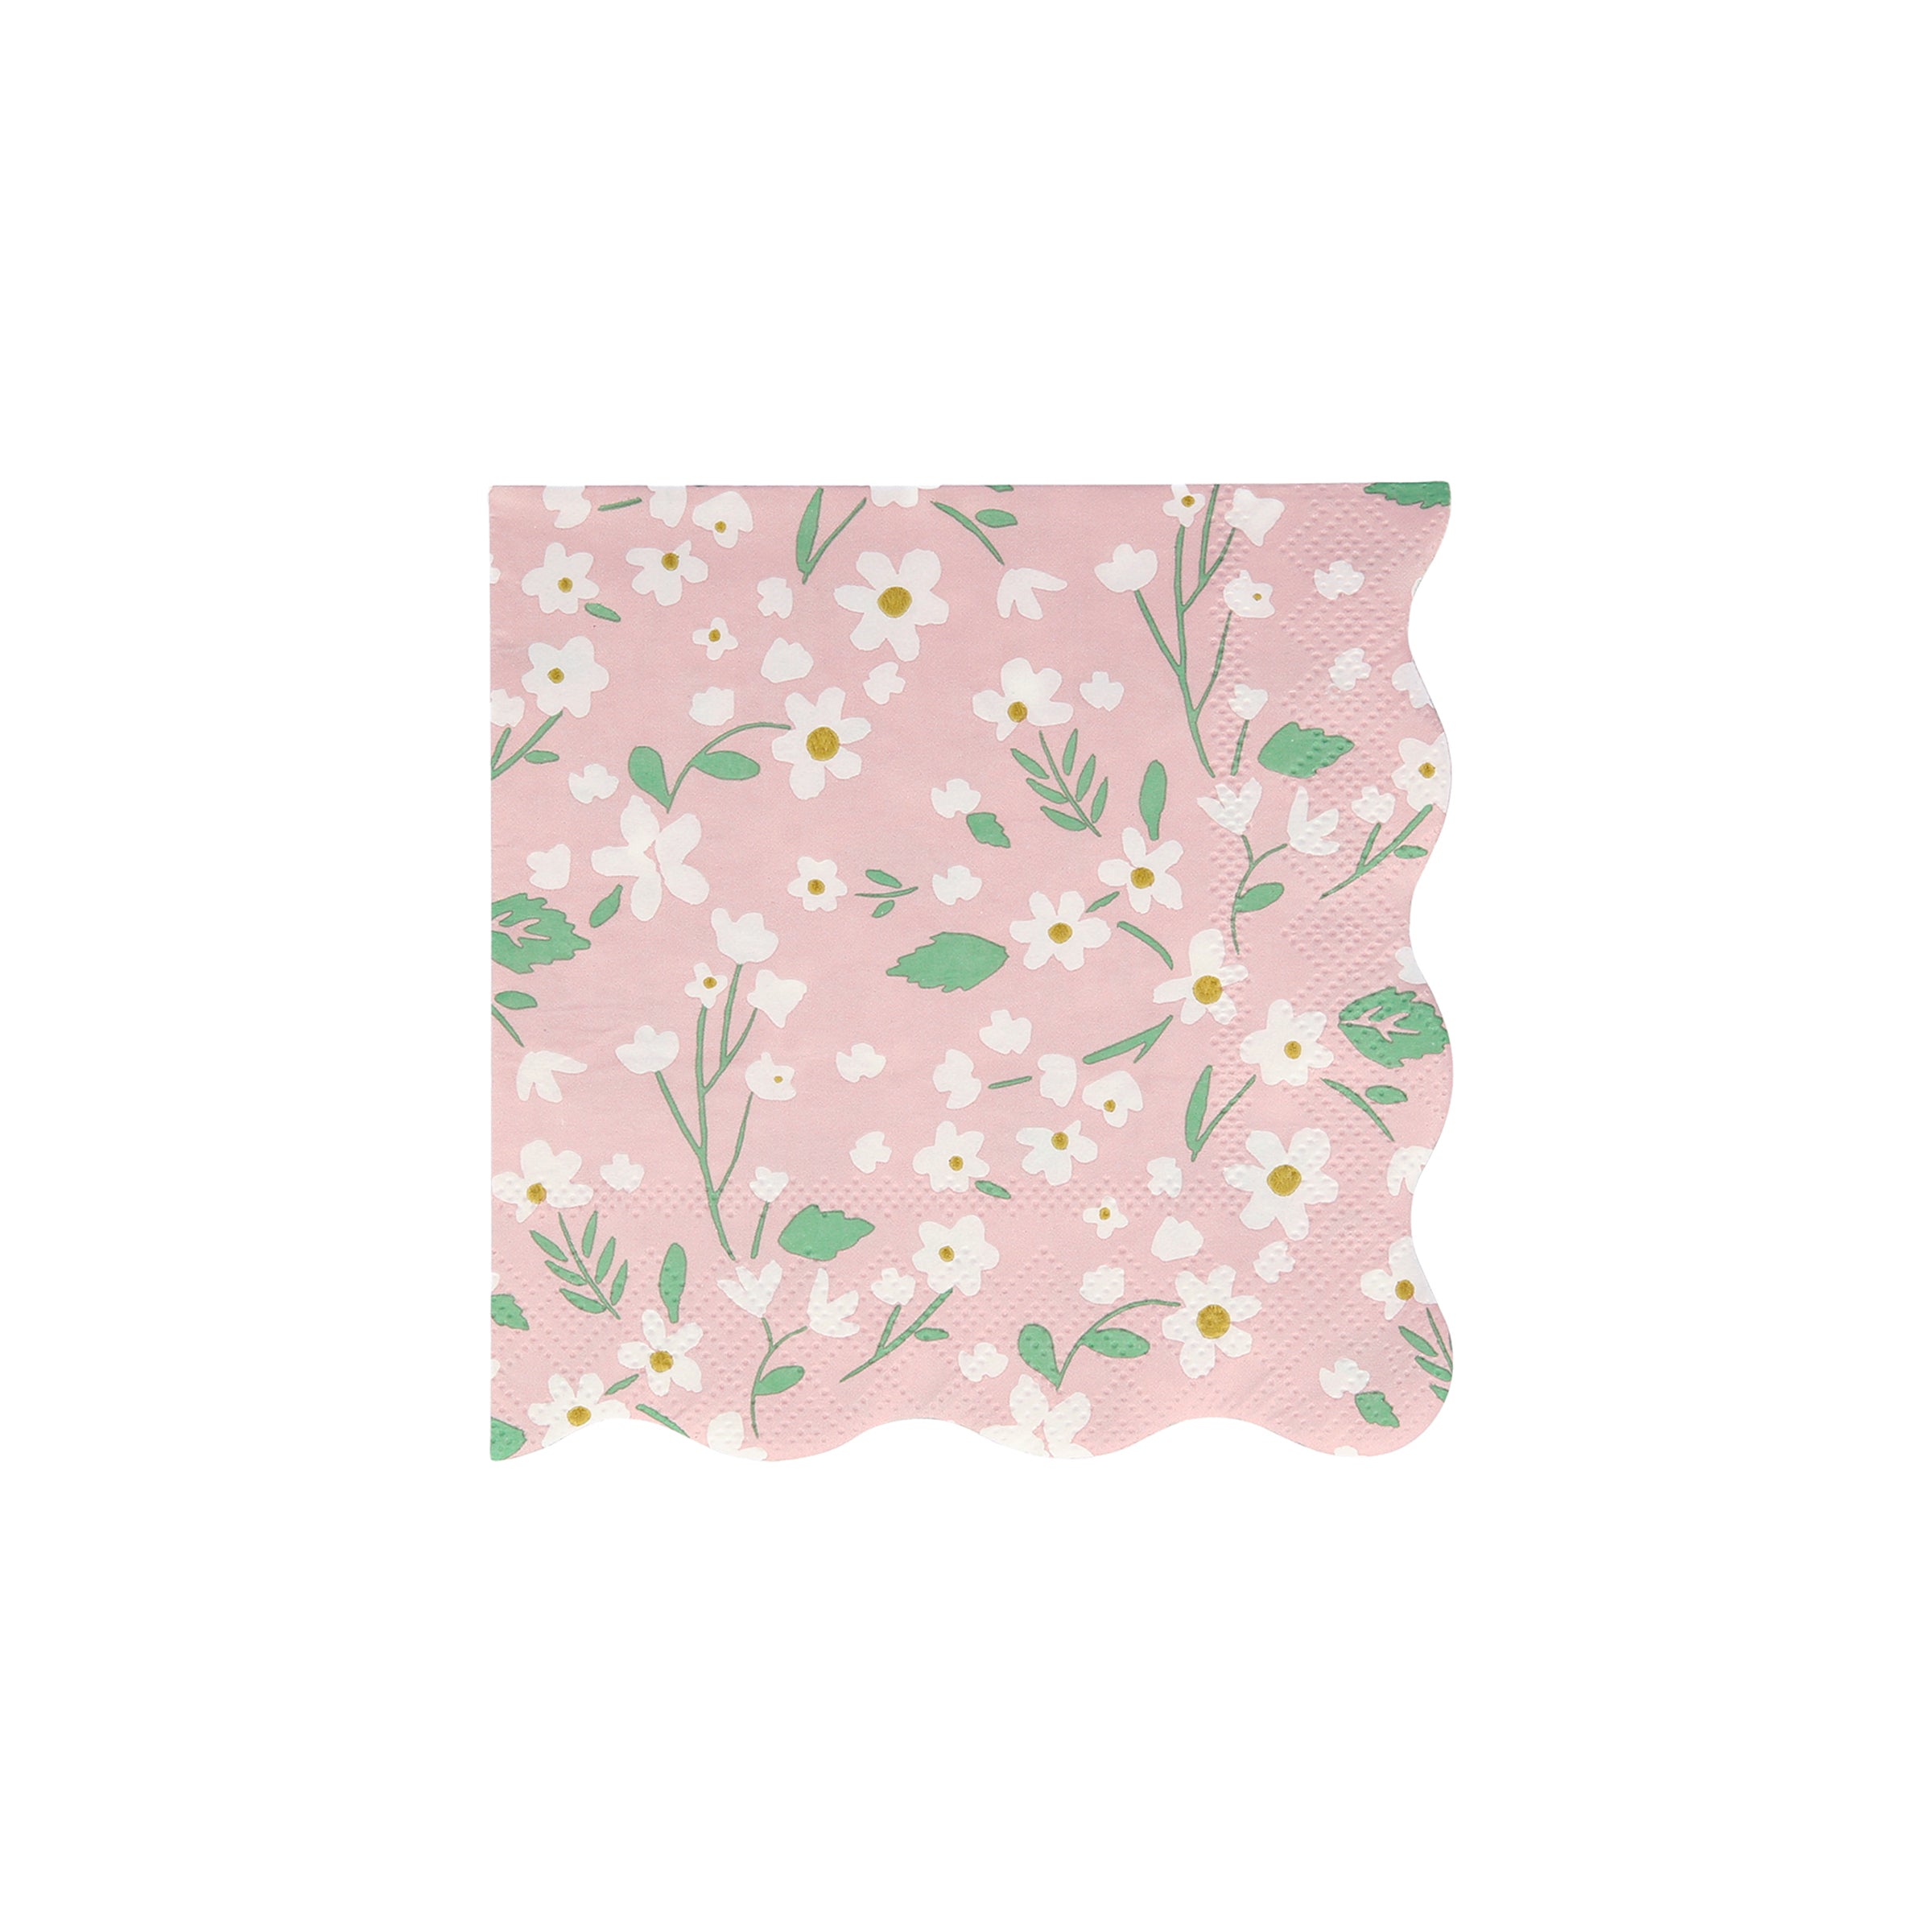 Our paper napkins have a pretty ditsy floral design, ideal as cocktail napkins, or for picnics or kids birthday parties.